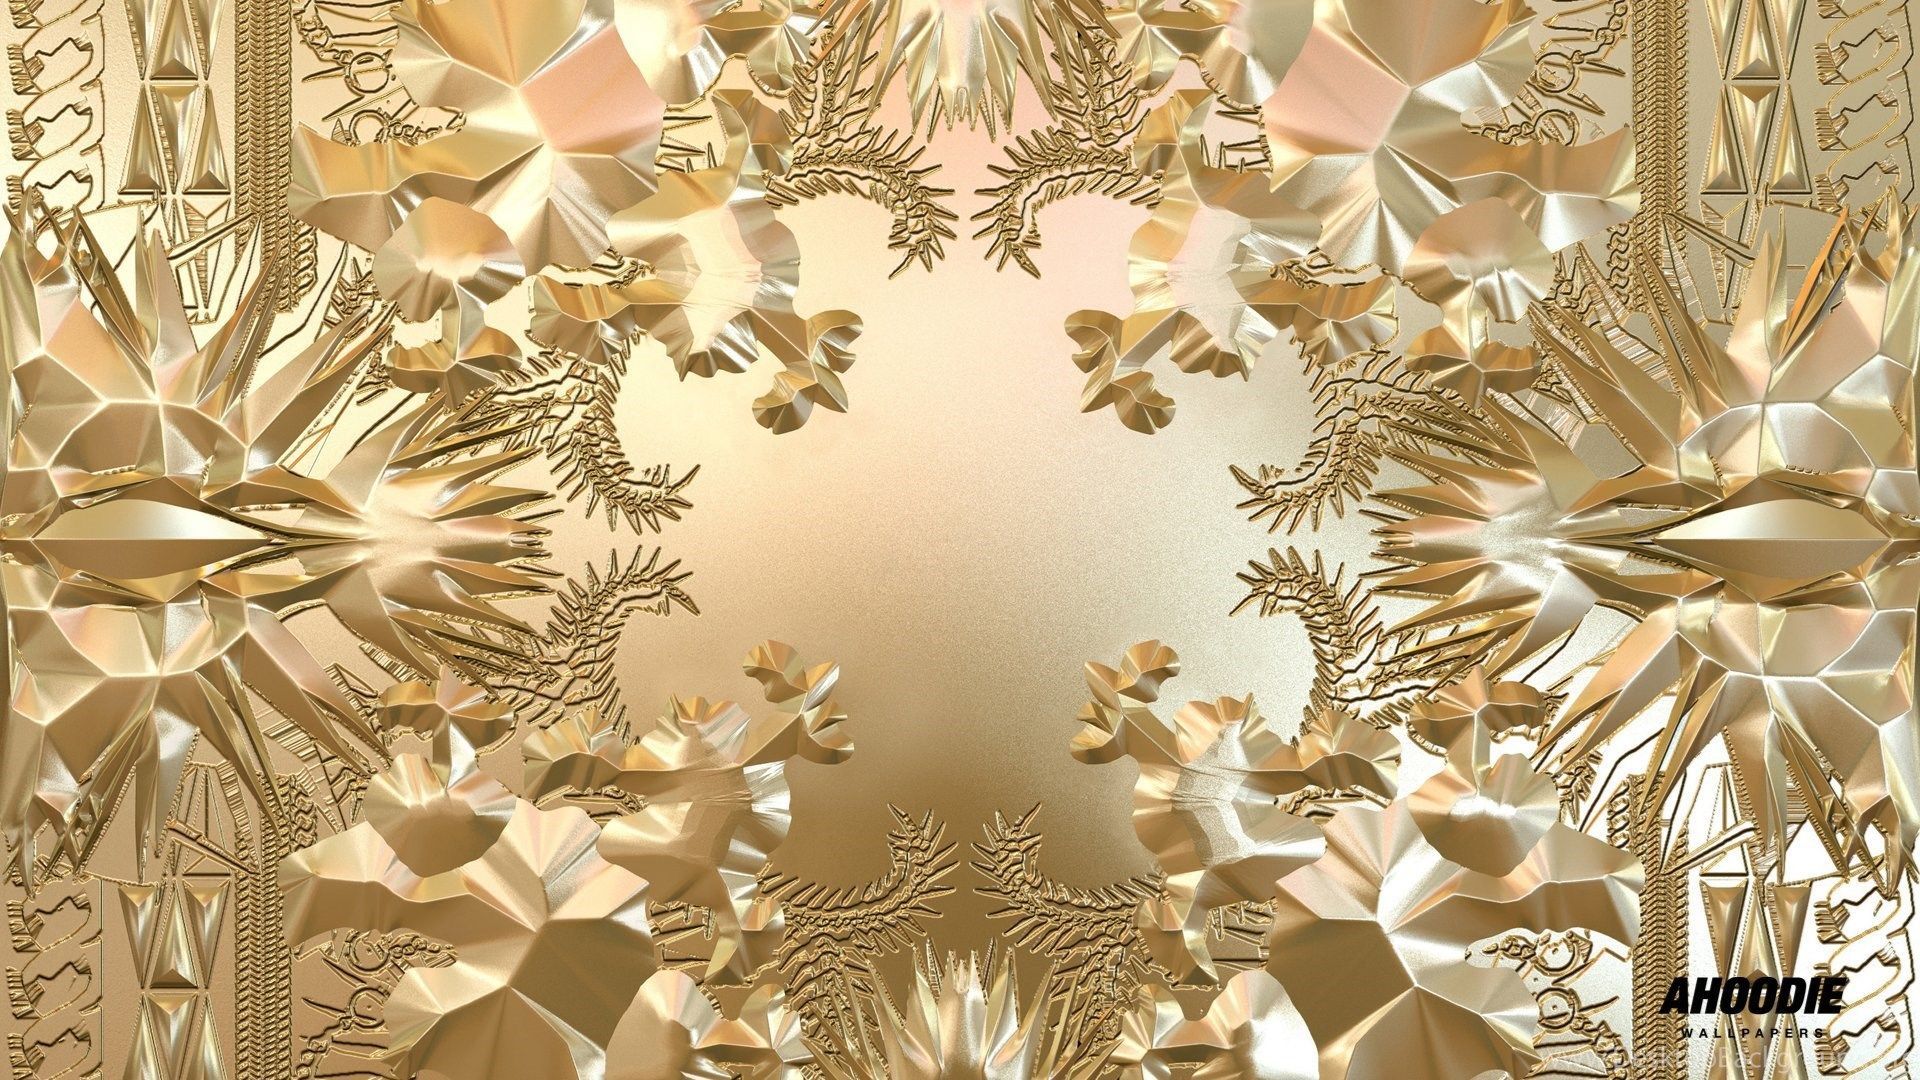 Kanye West Cover Watch The Throne Wallpaper WallDevil Best. Desktop Background